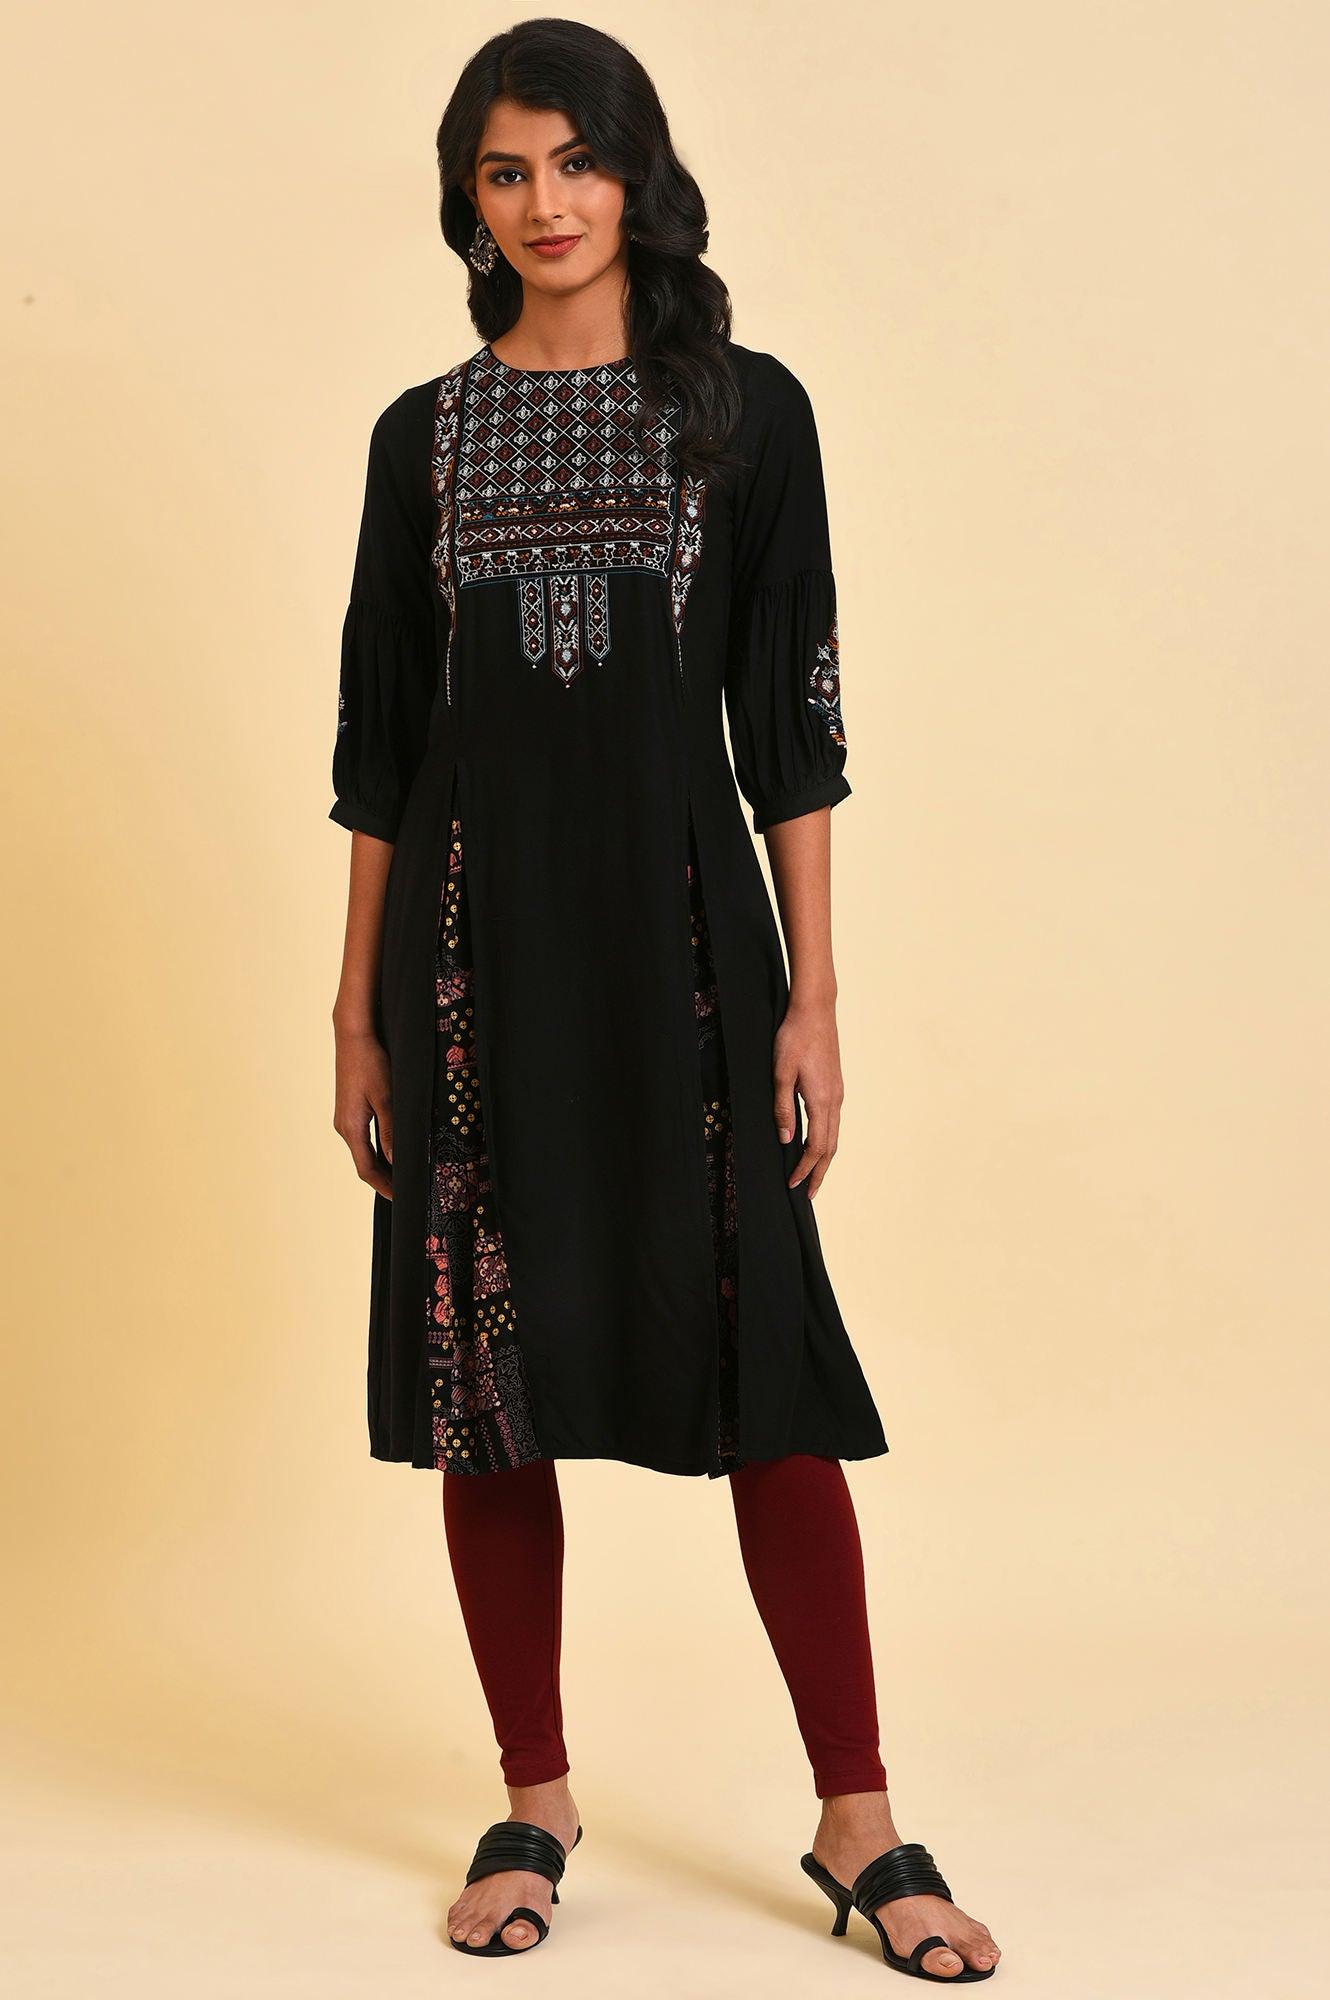 Black Godget Tunic With Multi-Coloured Embroidery - wforwoman